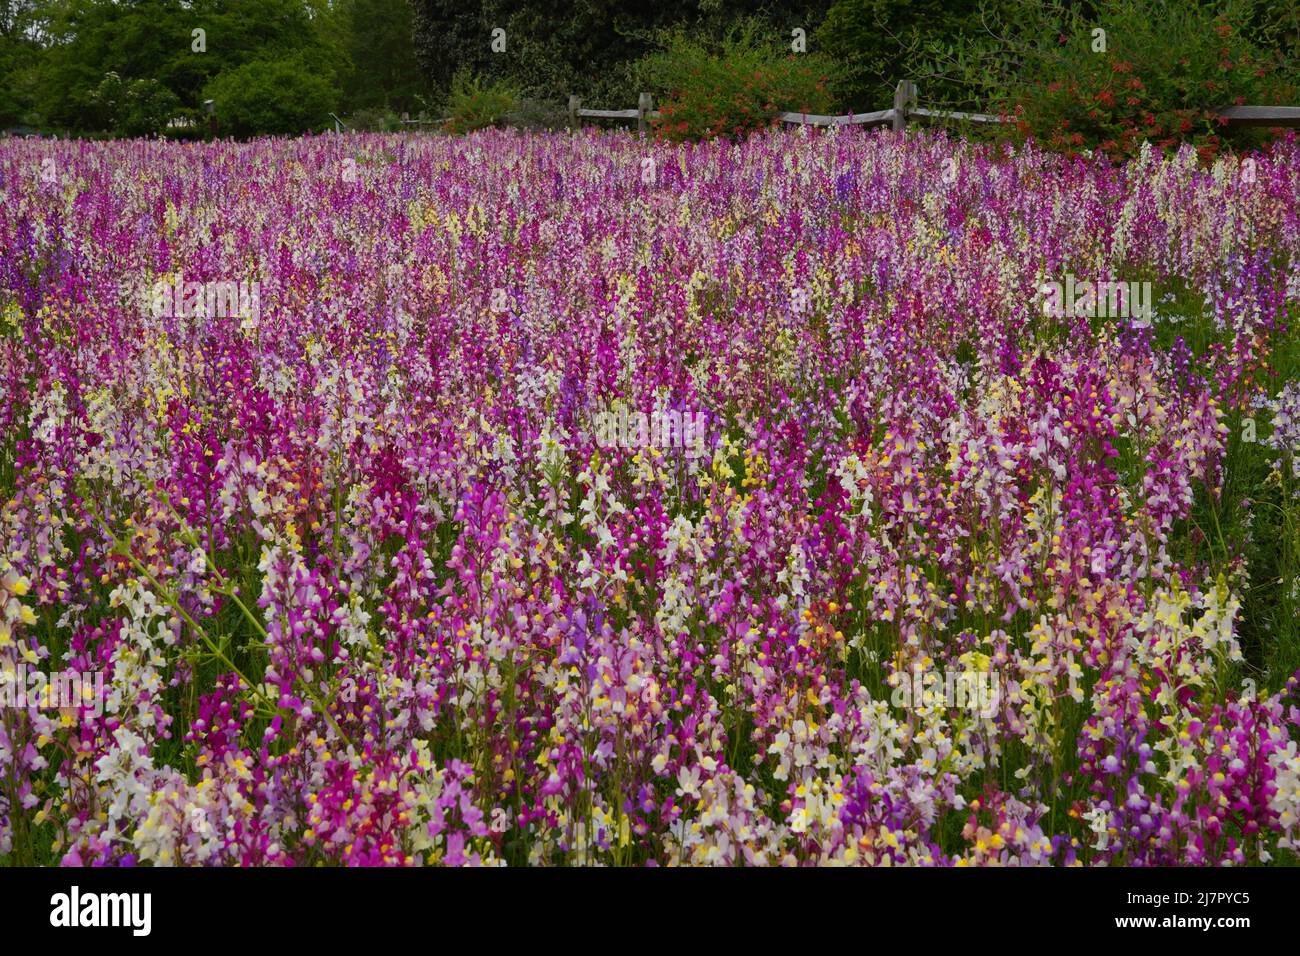 A field of Spurred Snapdragons - Linaria maroccana - also known as Toadflax in bloom Stock Photo